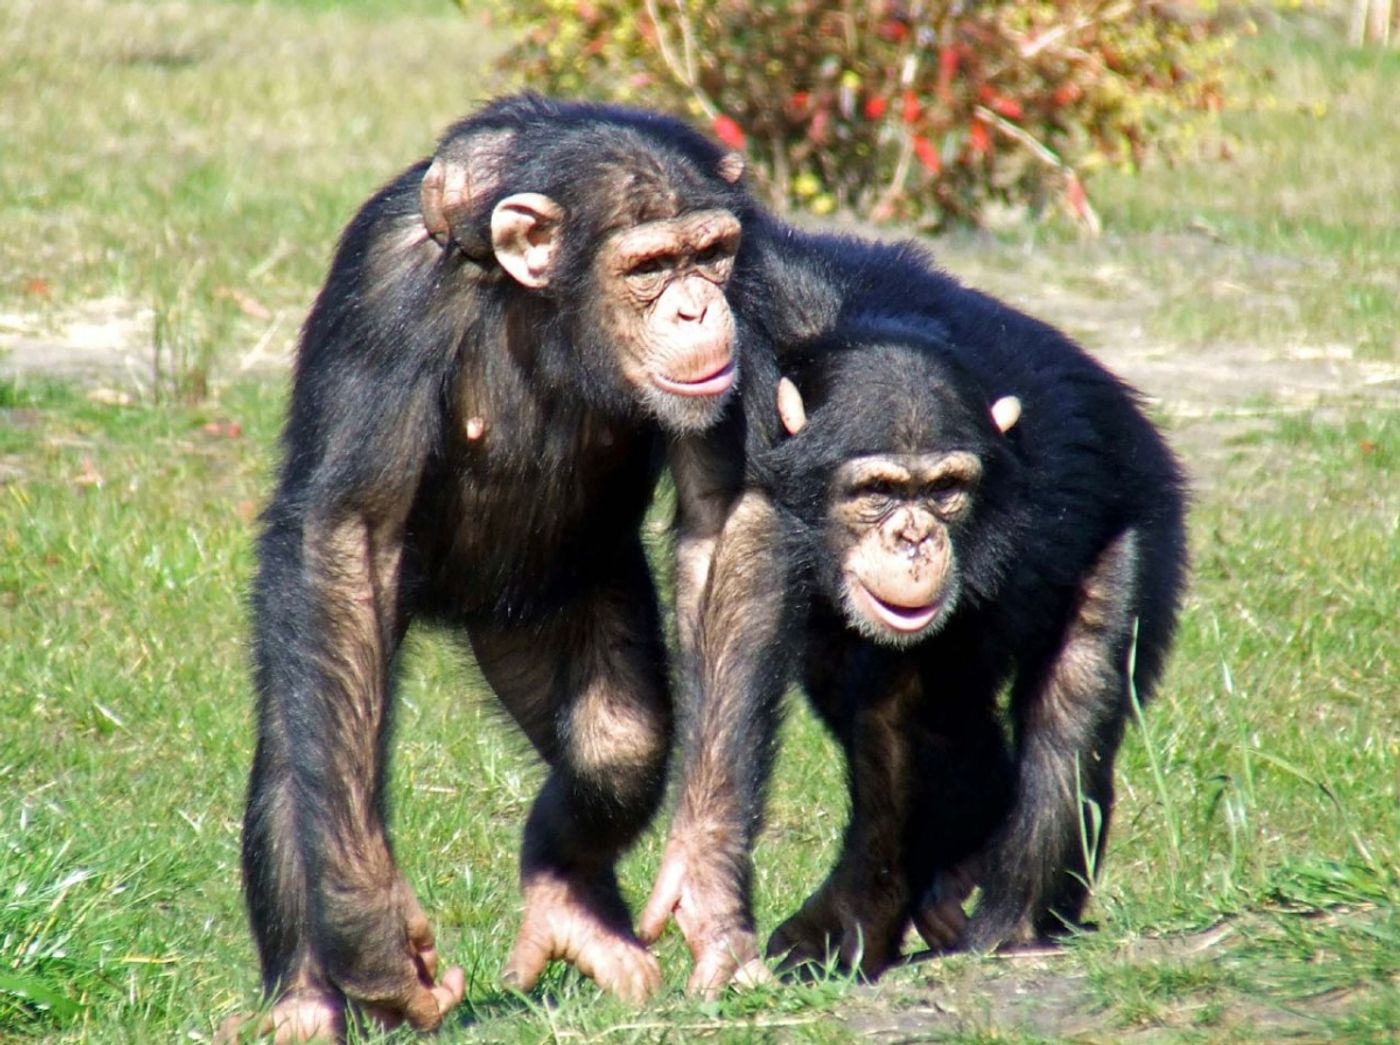 Chimpanzees are less stressed when they have friends to accompany them.